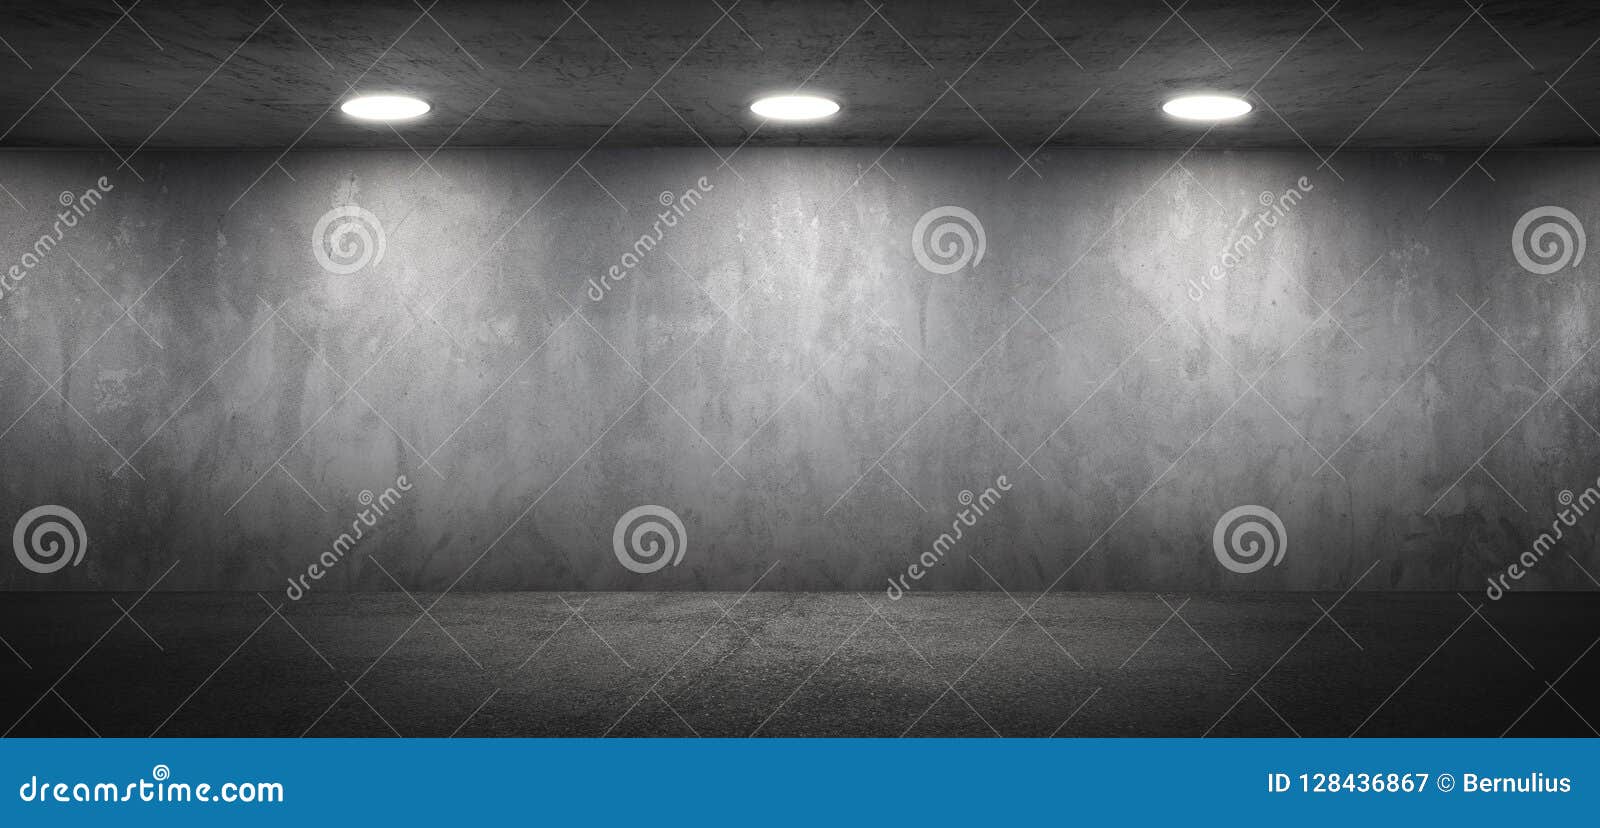 Blank Concrete Office Room Textured Wall Background Stock Image - Image of  spacious, wall: 128436867